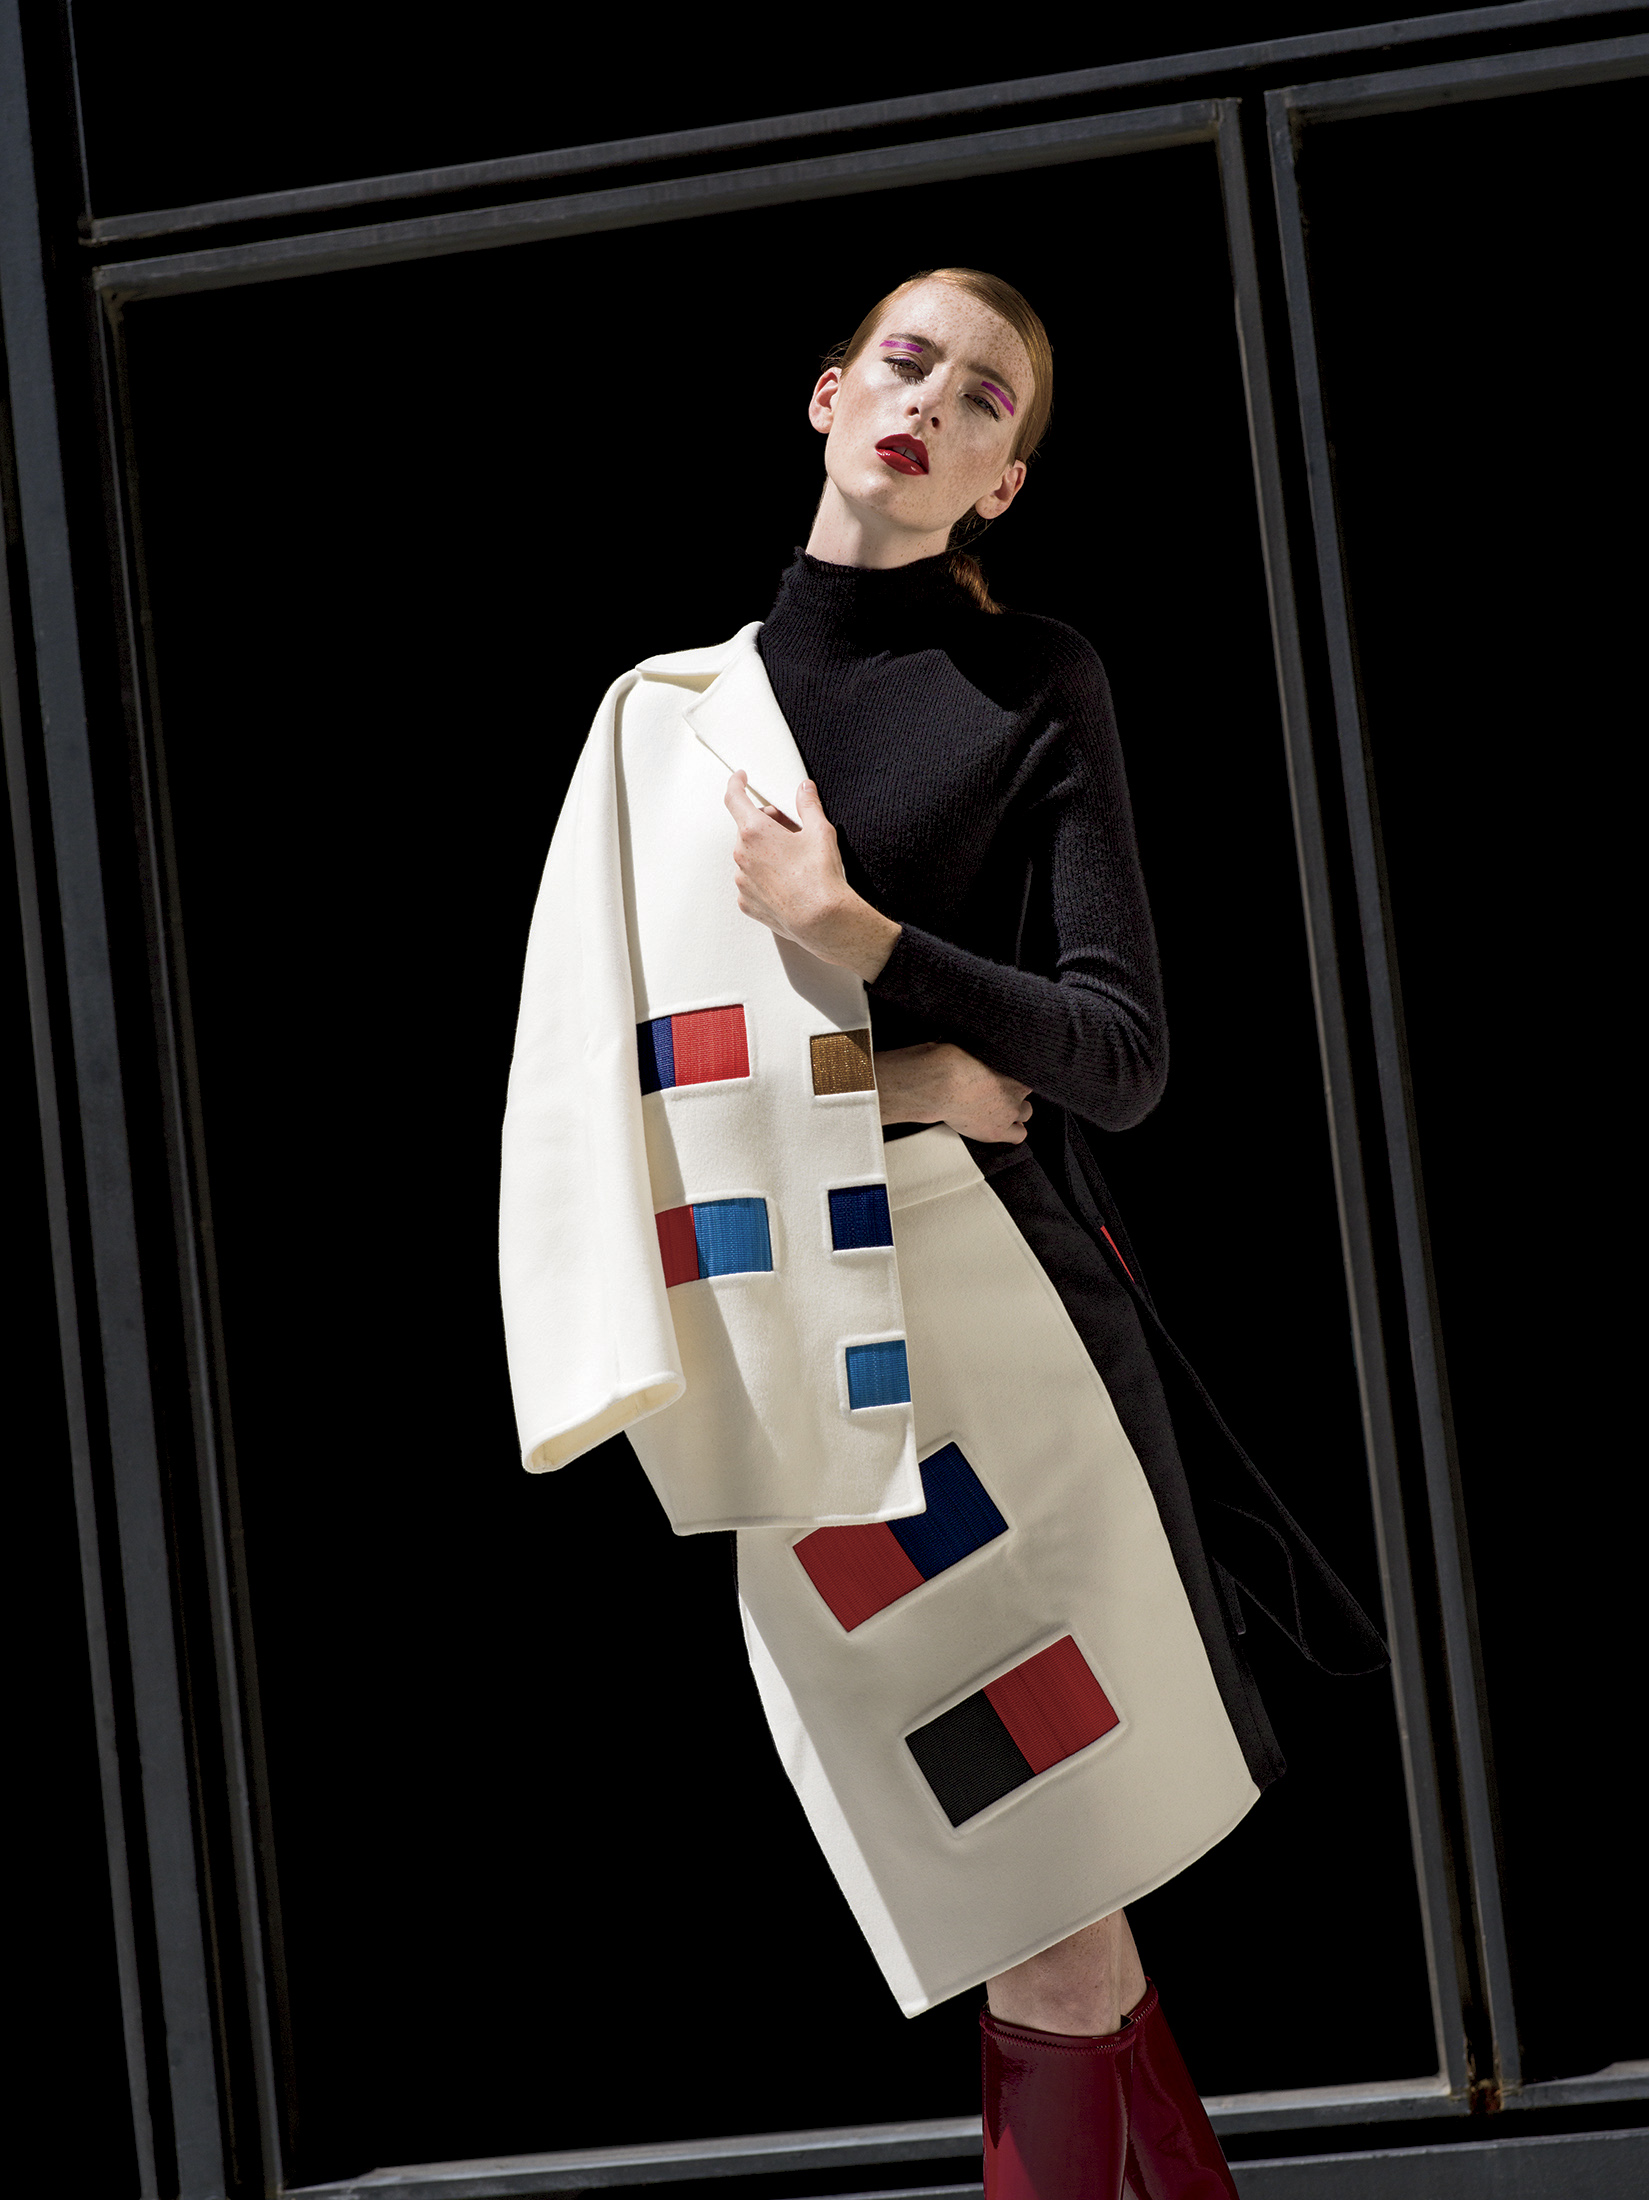 Modern Icon, Fall Fashion Story inspired by Mies van der Rohe and the Bauhaus. For Chicago Magazine